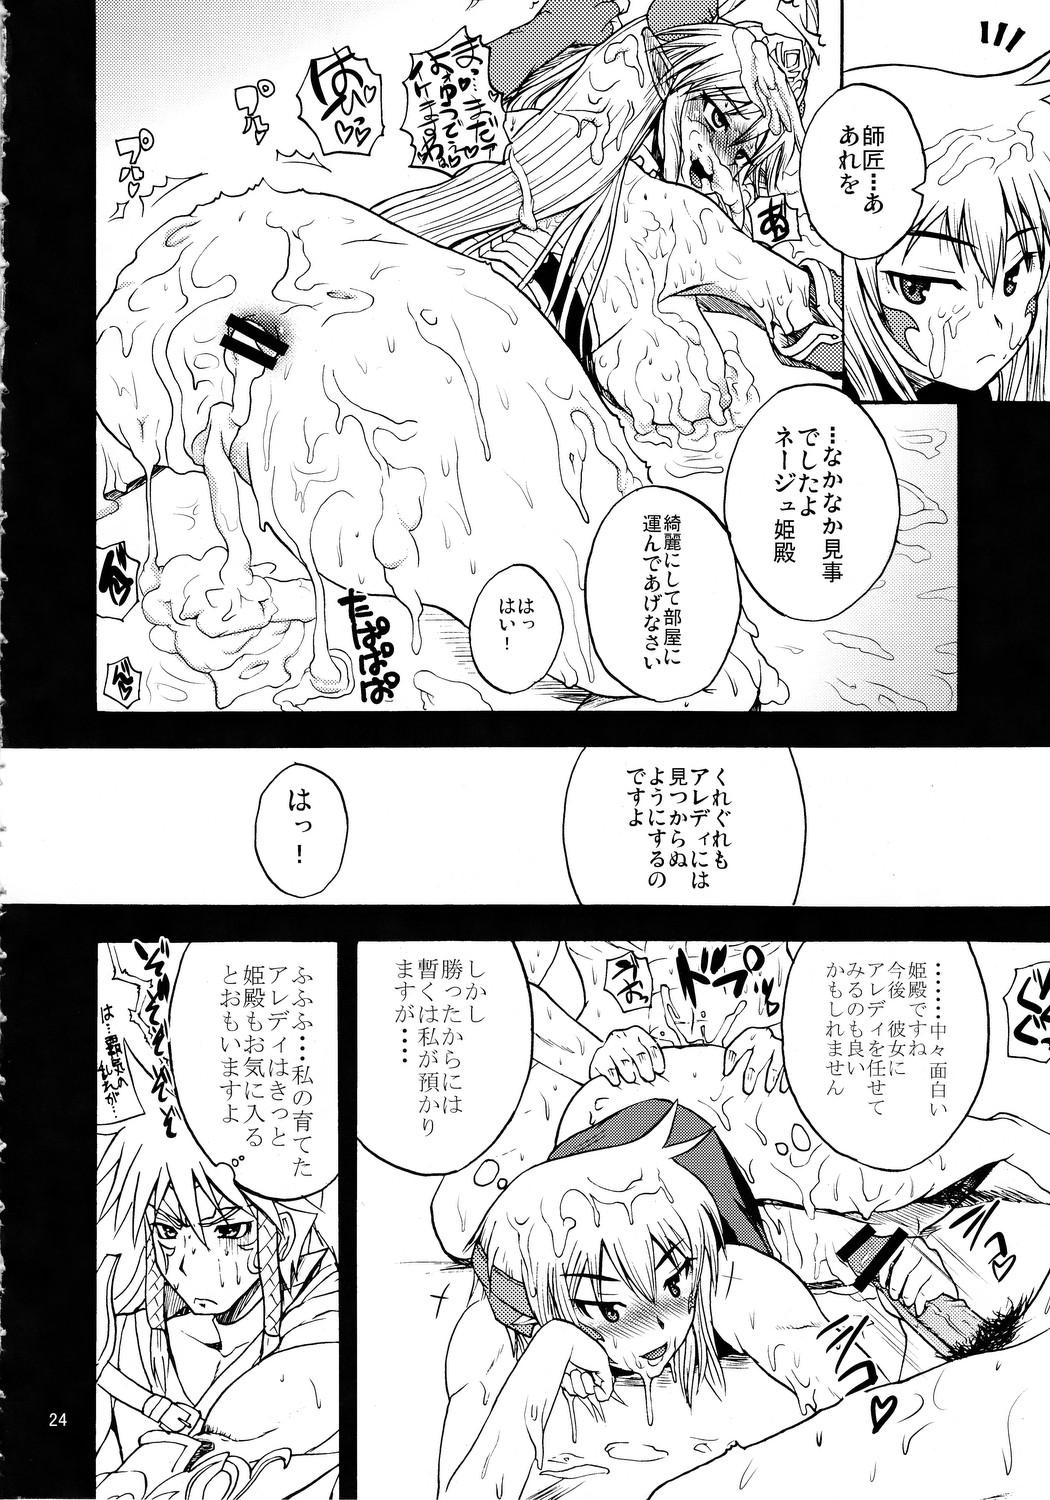 Real Orgasms Brilliant taste - Super robot wars Endless frontier Italiana - Page 23